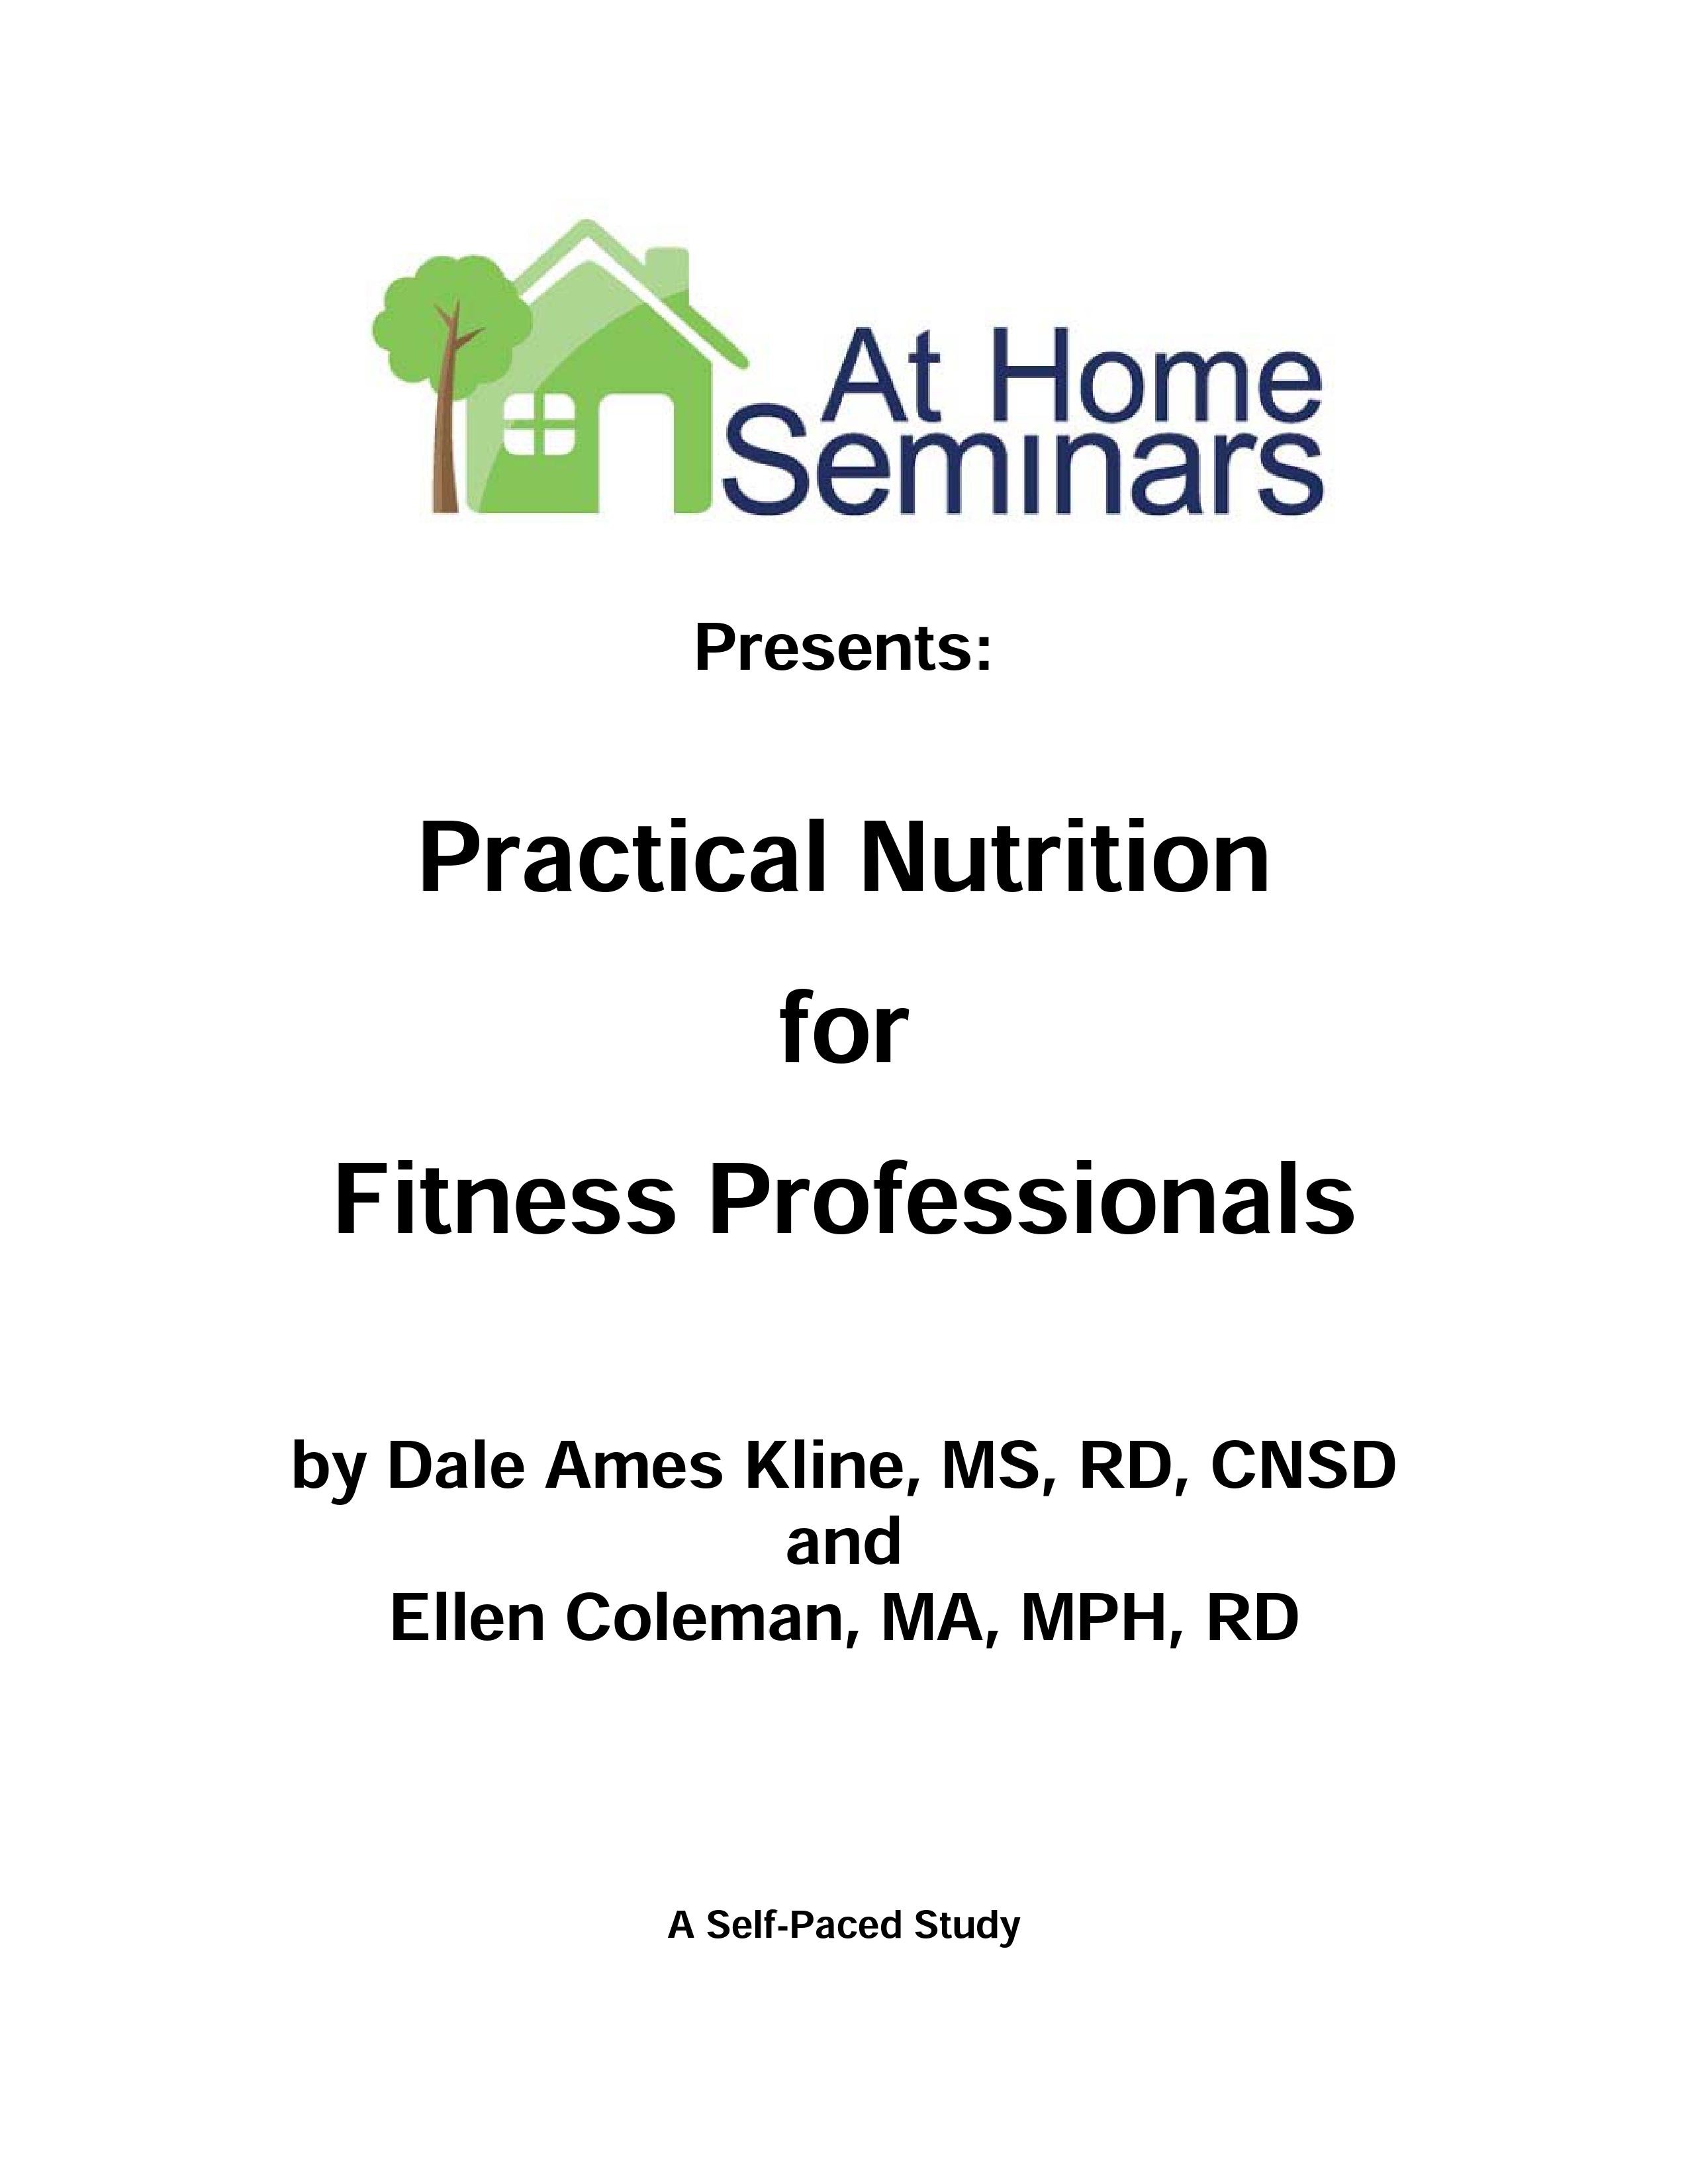 Share A Course: Practical Nutrition for Fitness Professionals 